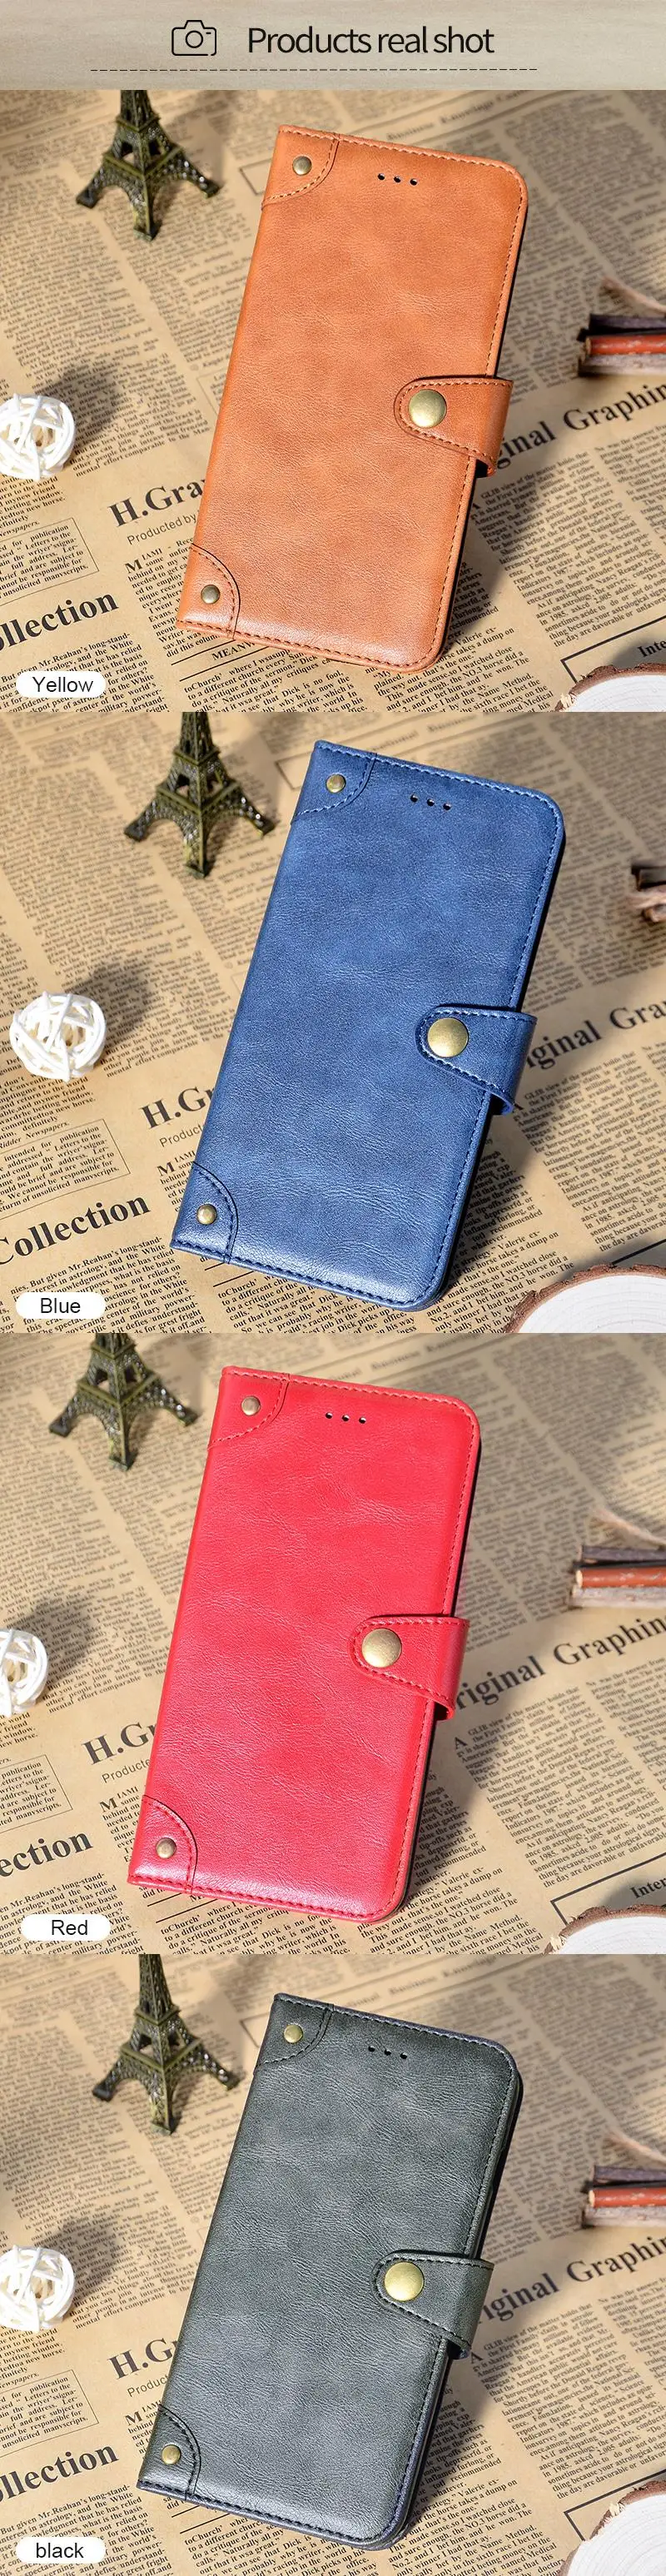 Business Leather Case For LG Stylo 5 Stylo5 Case Luxury Vintage Flip Wallet Cover For LG Stylo 5 Q720CS Retro Cover 6.2 inch